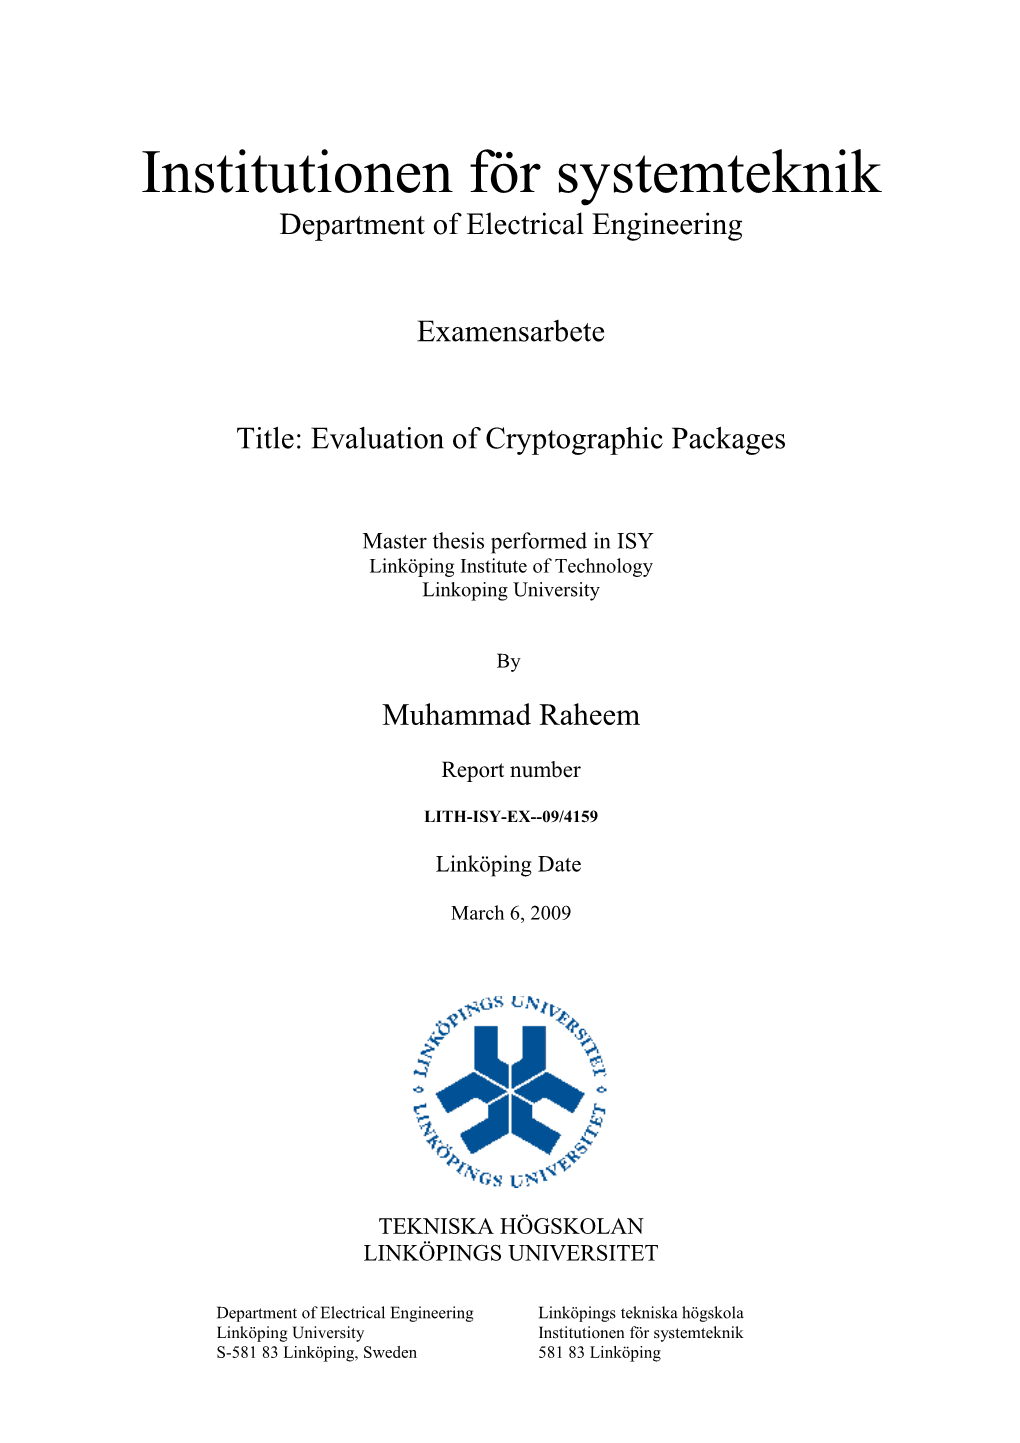 Evaluation of Cryptographic Packages